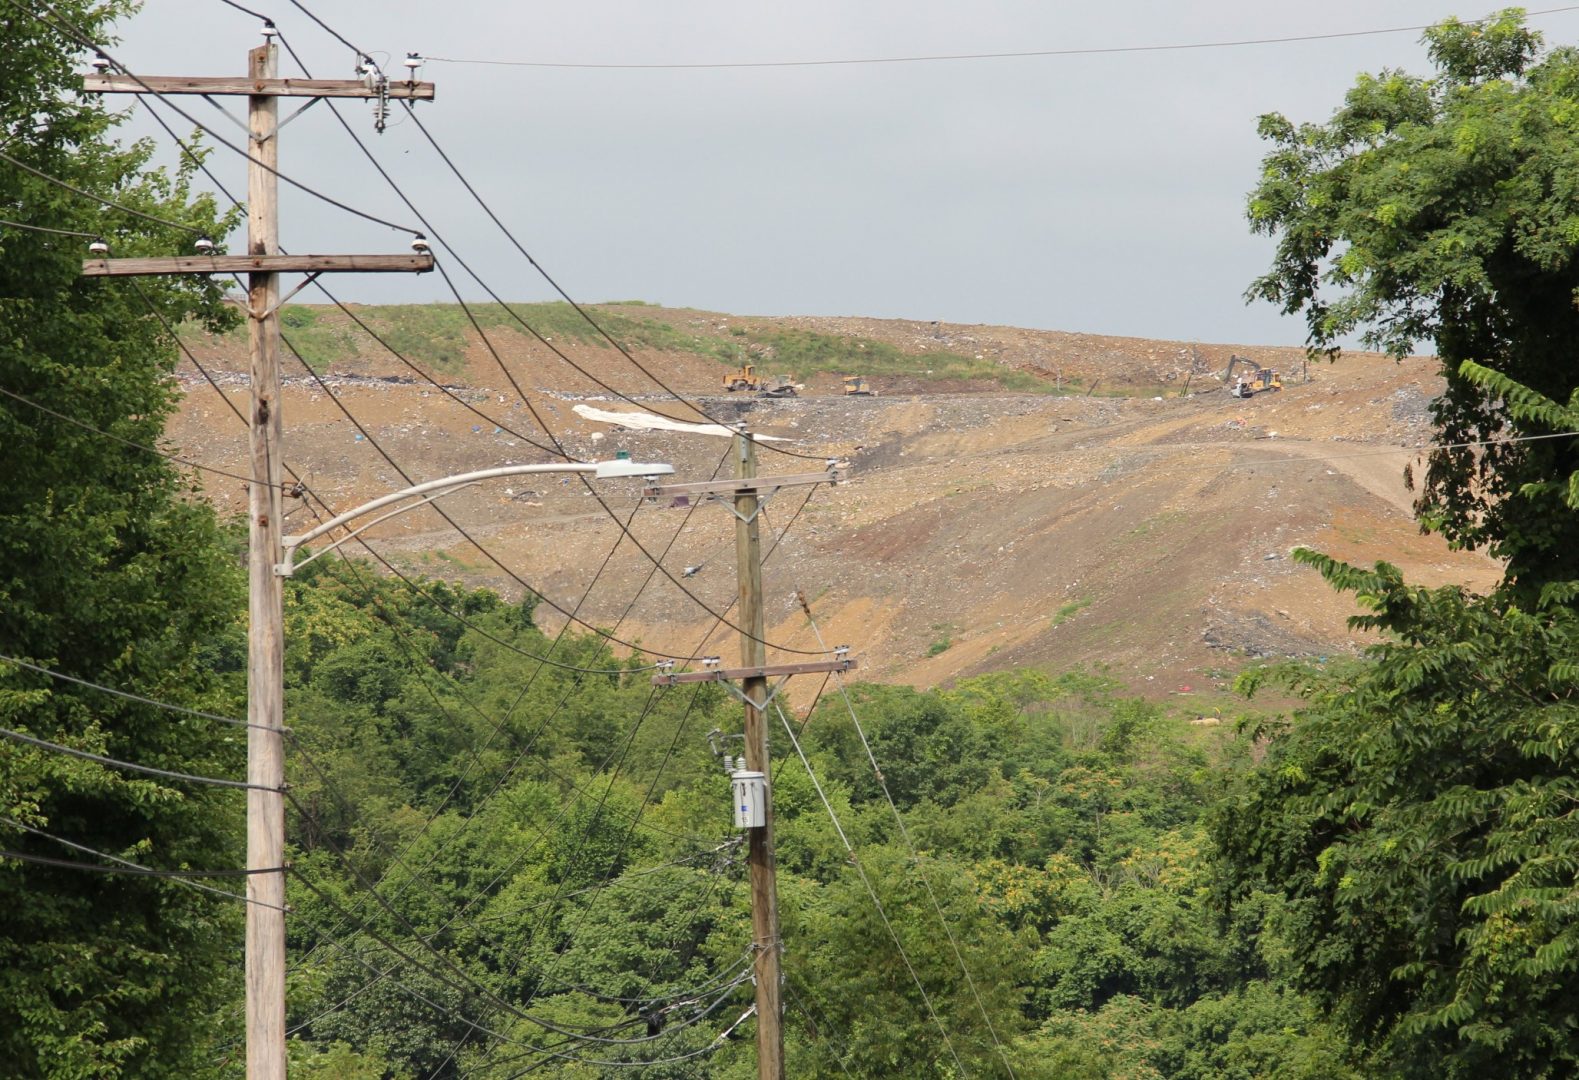 How did fracking contaminants end up in the Monongahela River? A